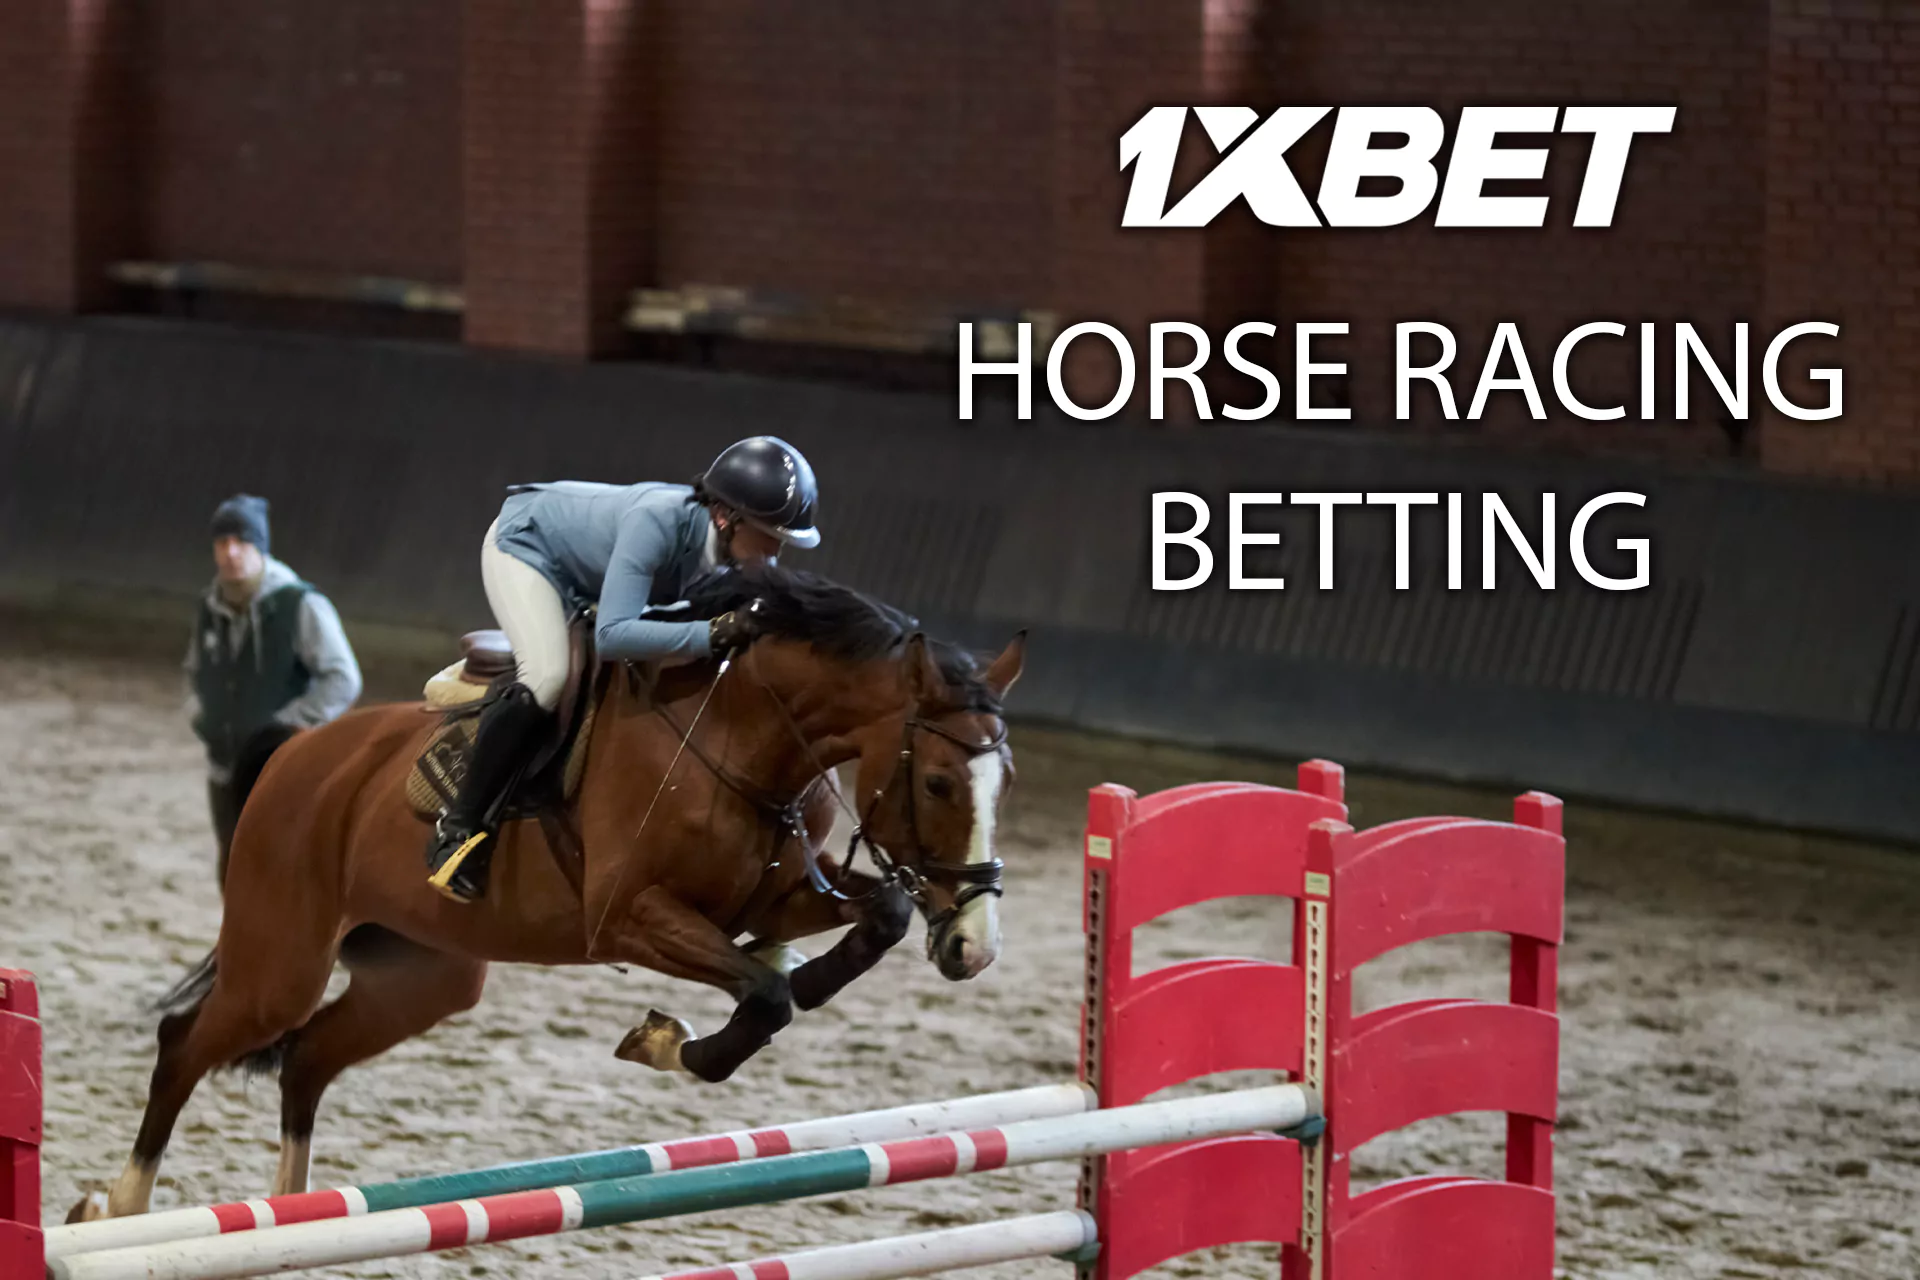 1xBet offers high odds betting on horse racing.